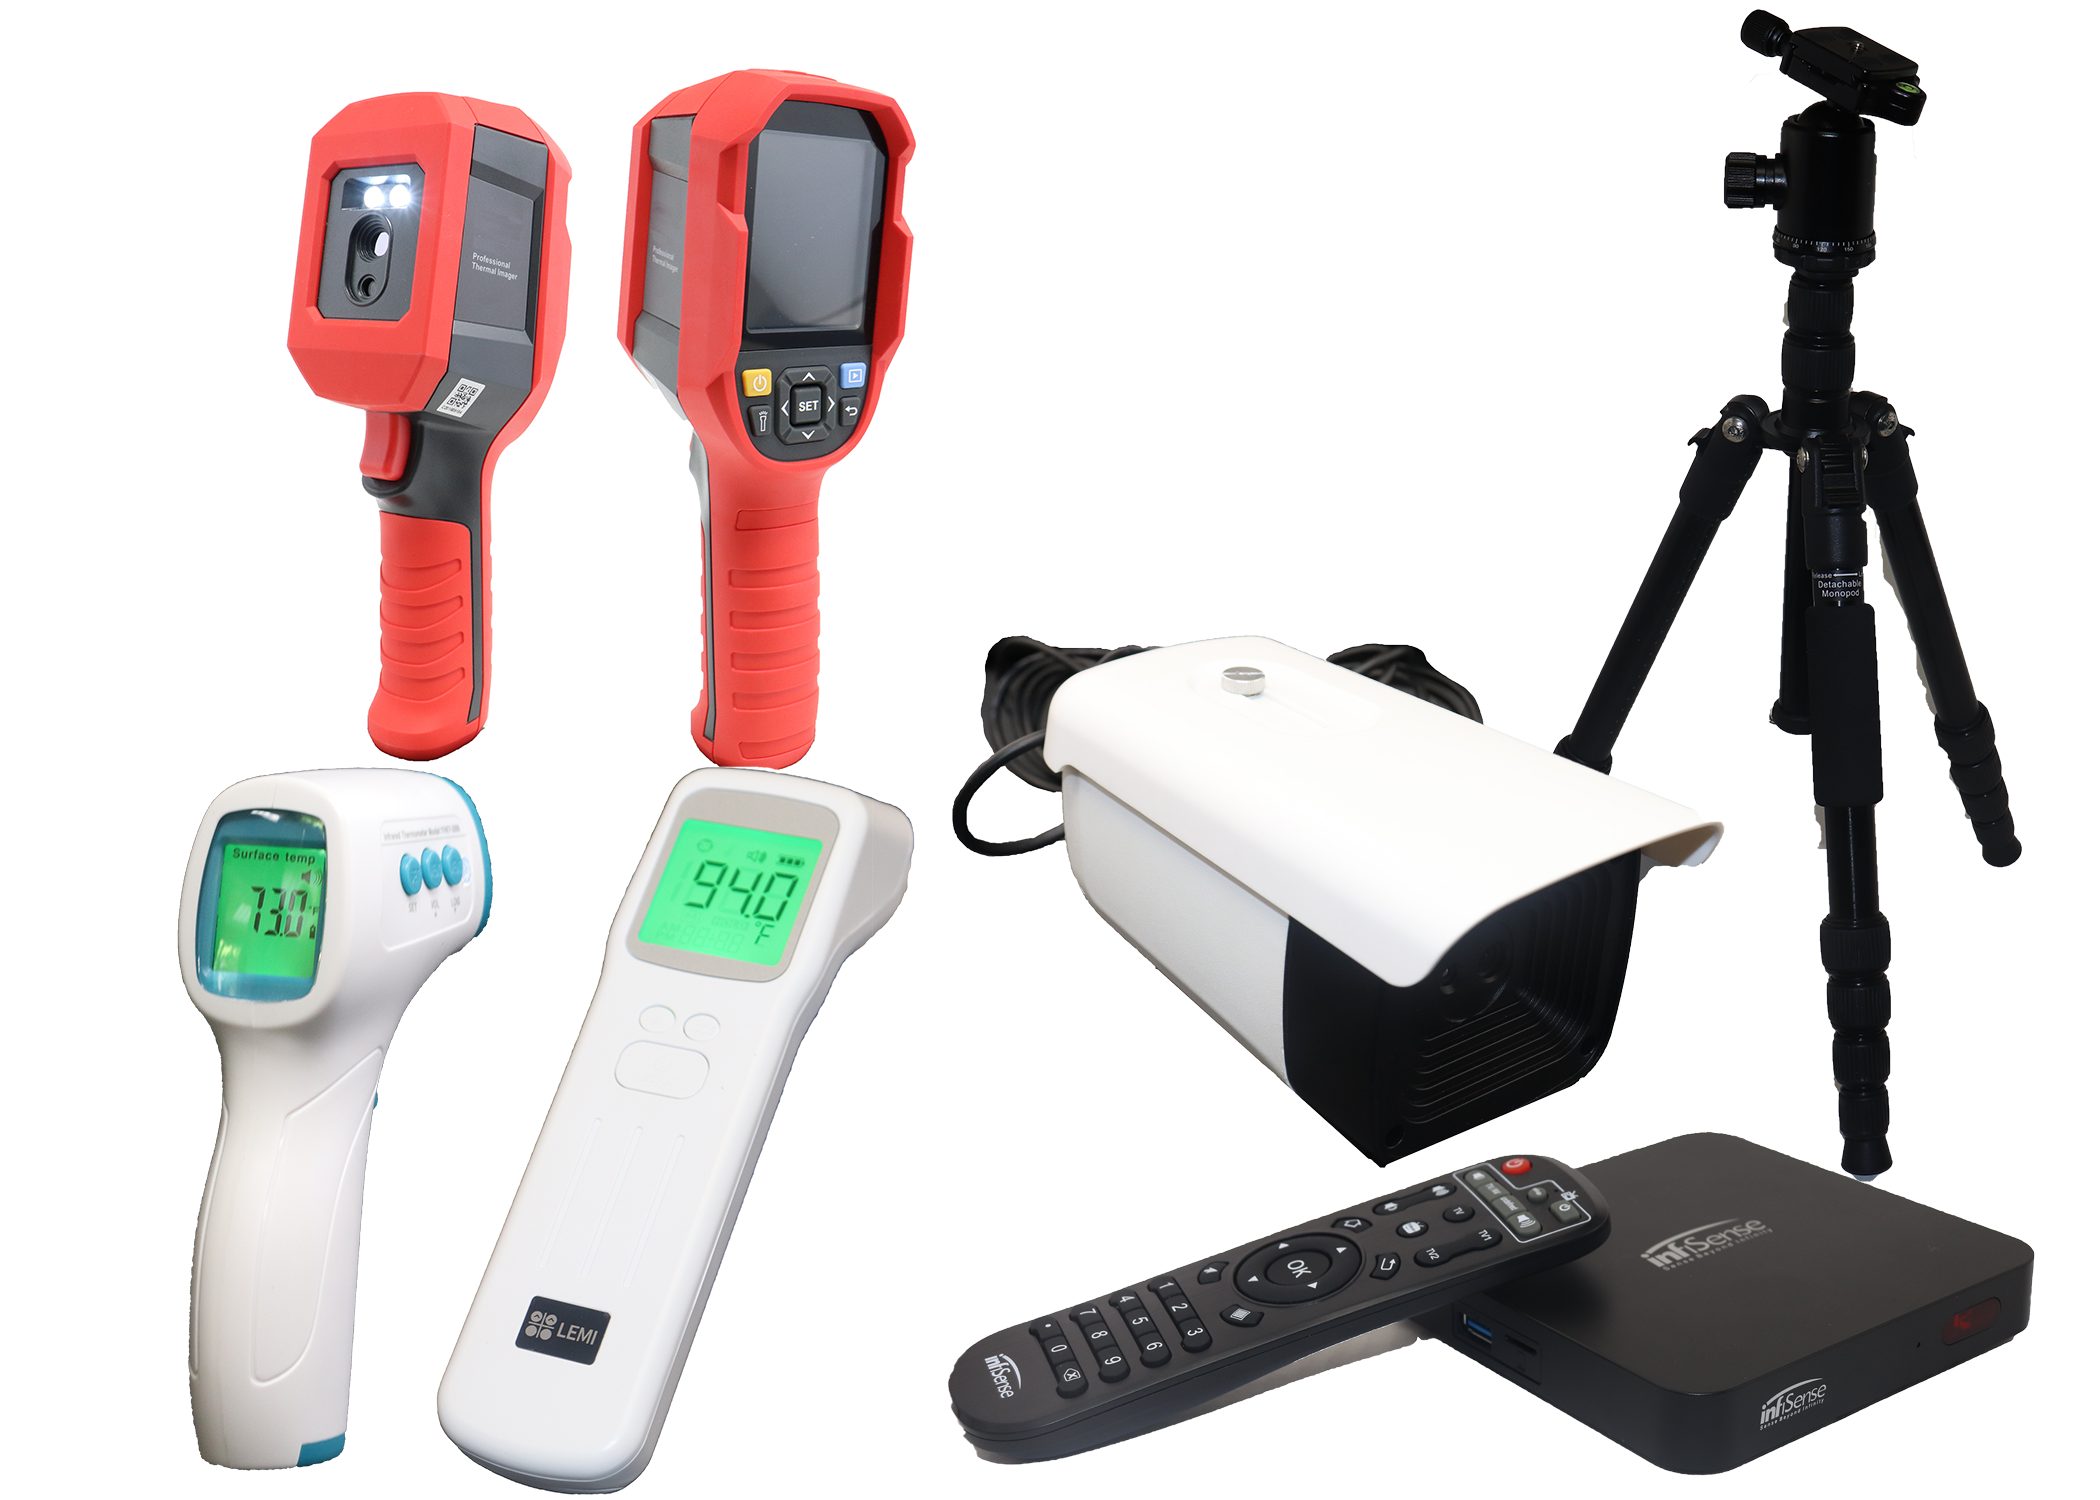 Thermometer / Thermal Imagers